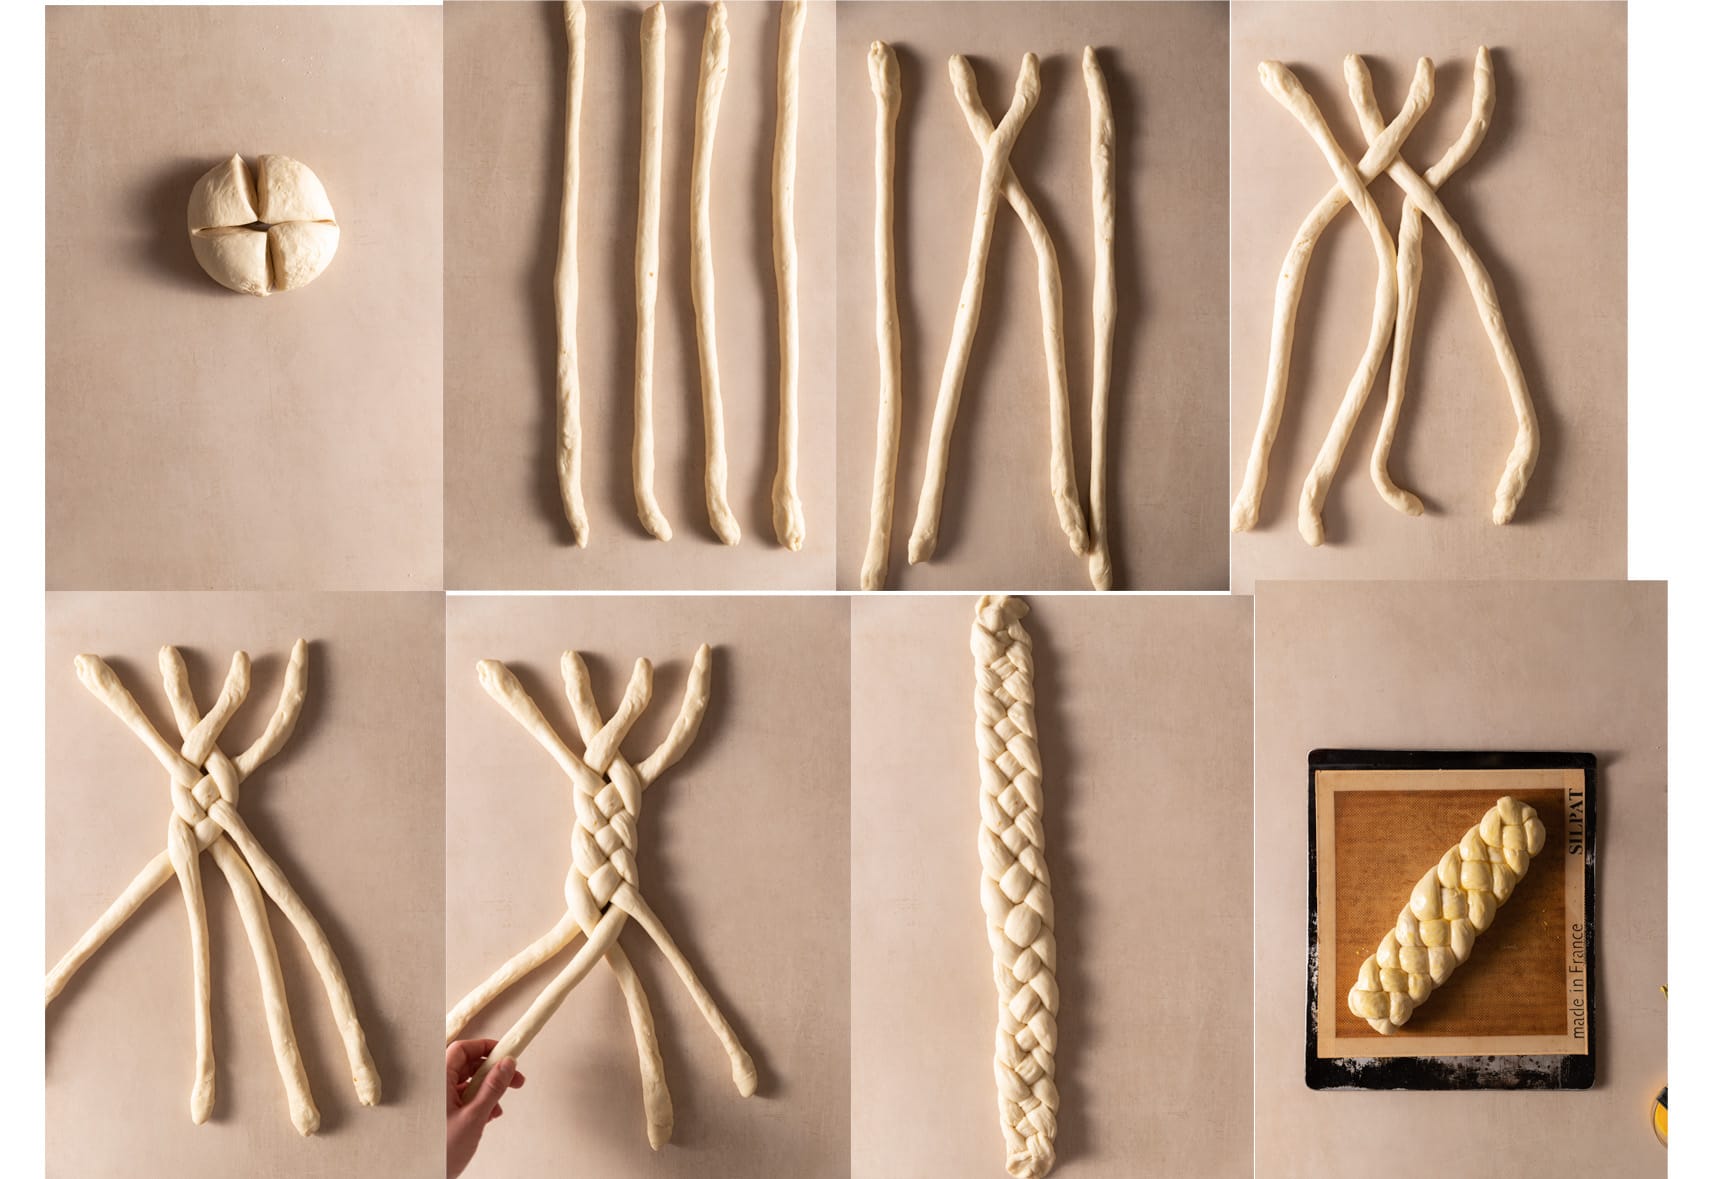 Process images of braiding and shaping the hefezopf.